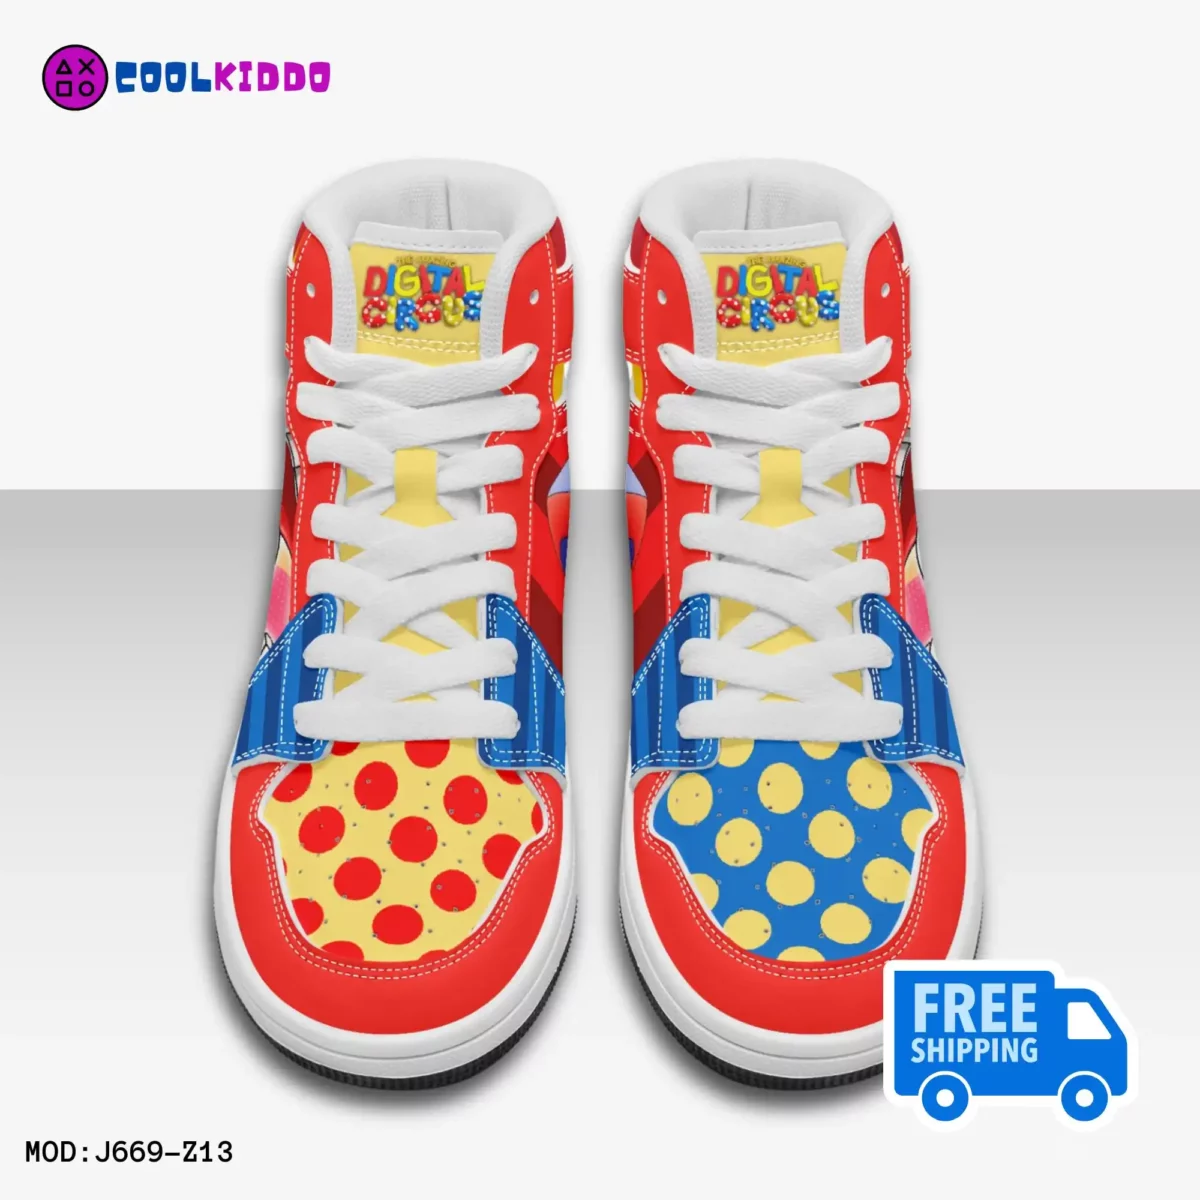 Personalized Name The Amazing Digital Circus Inspired High-Top Shoes, Leather Sneakers for Kids Cool Kiddo 14